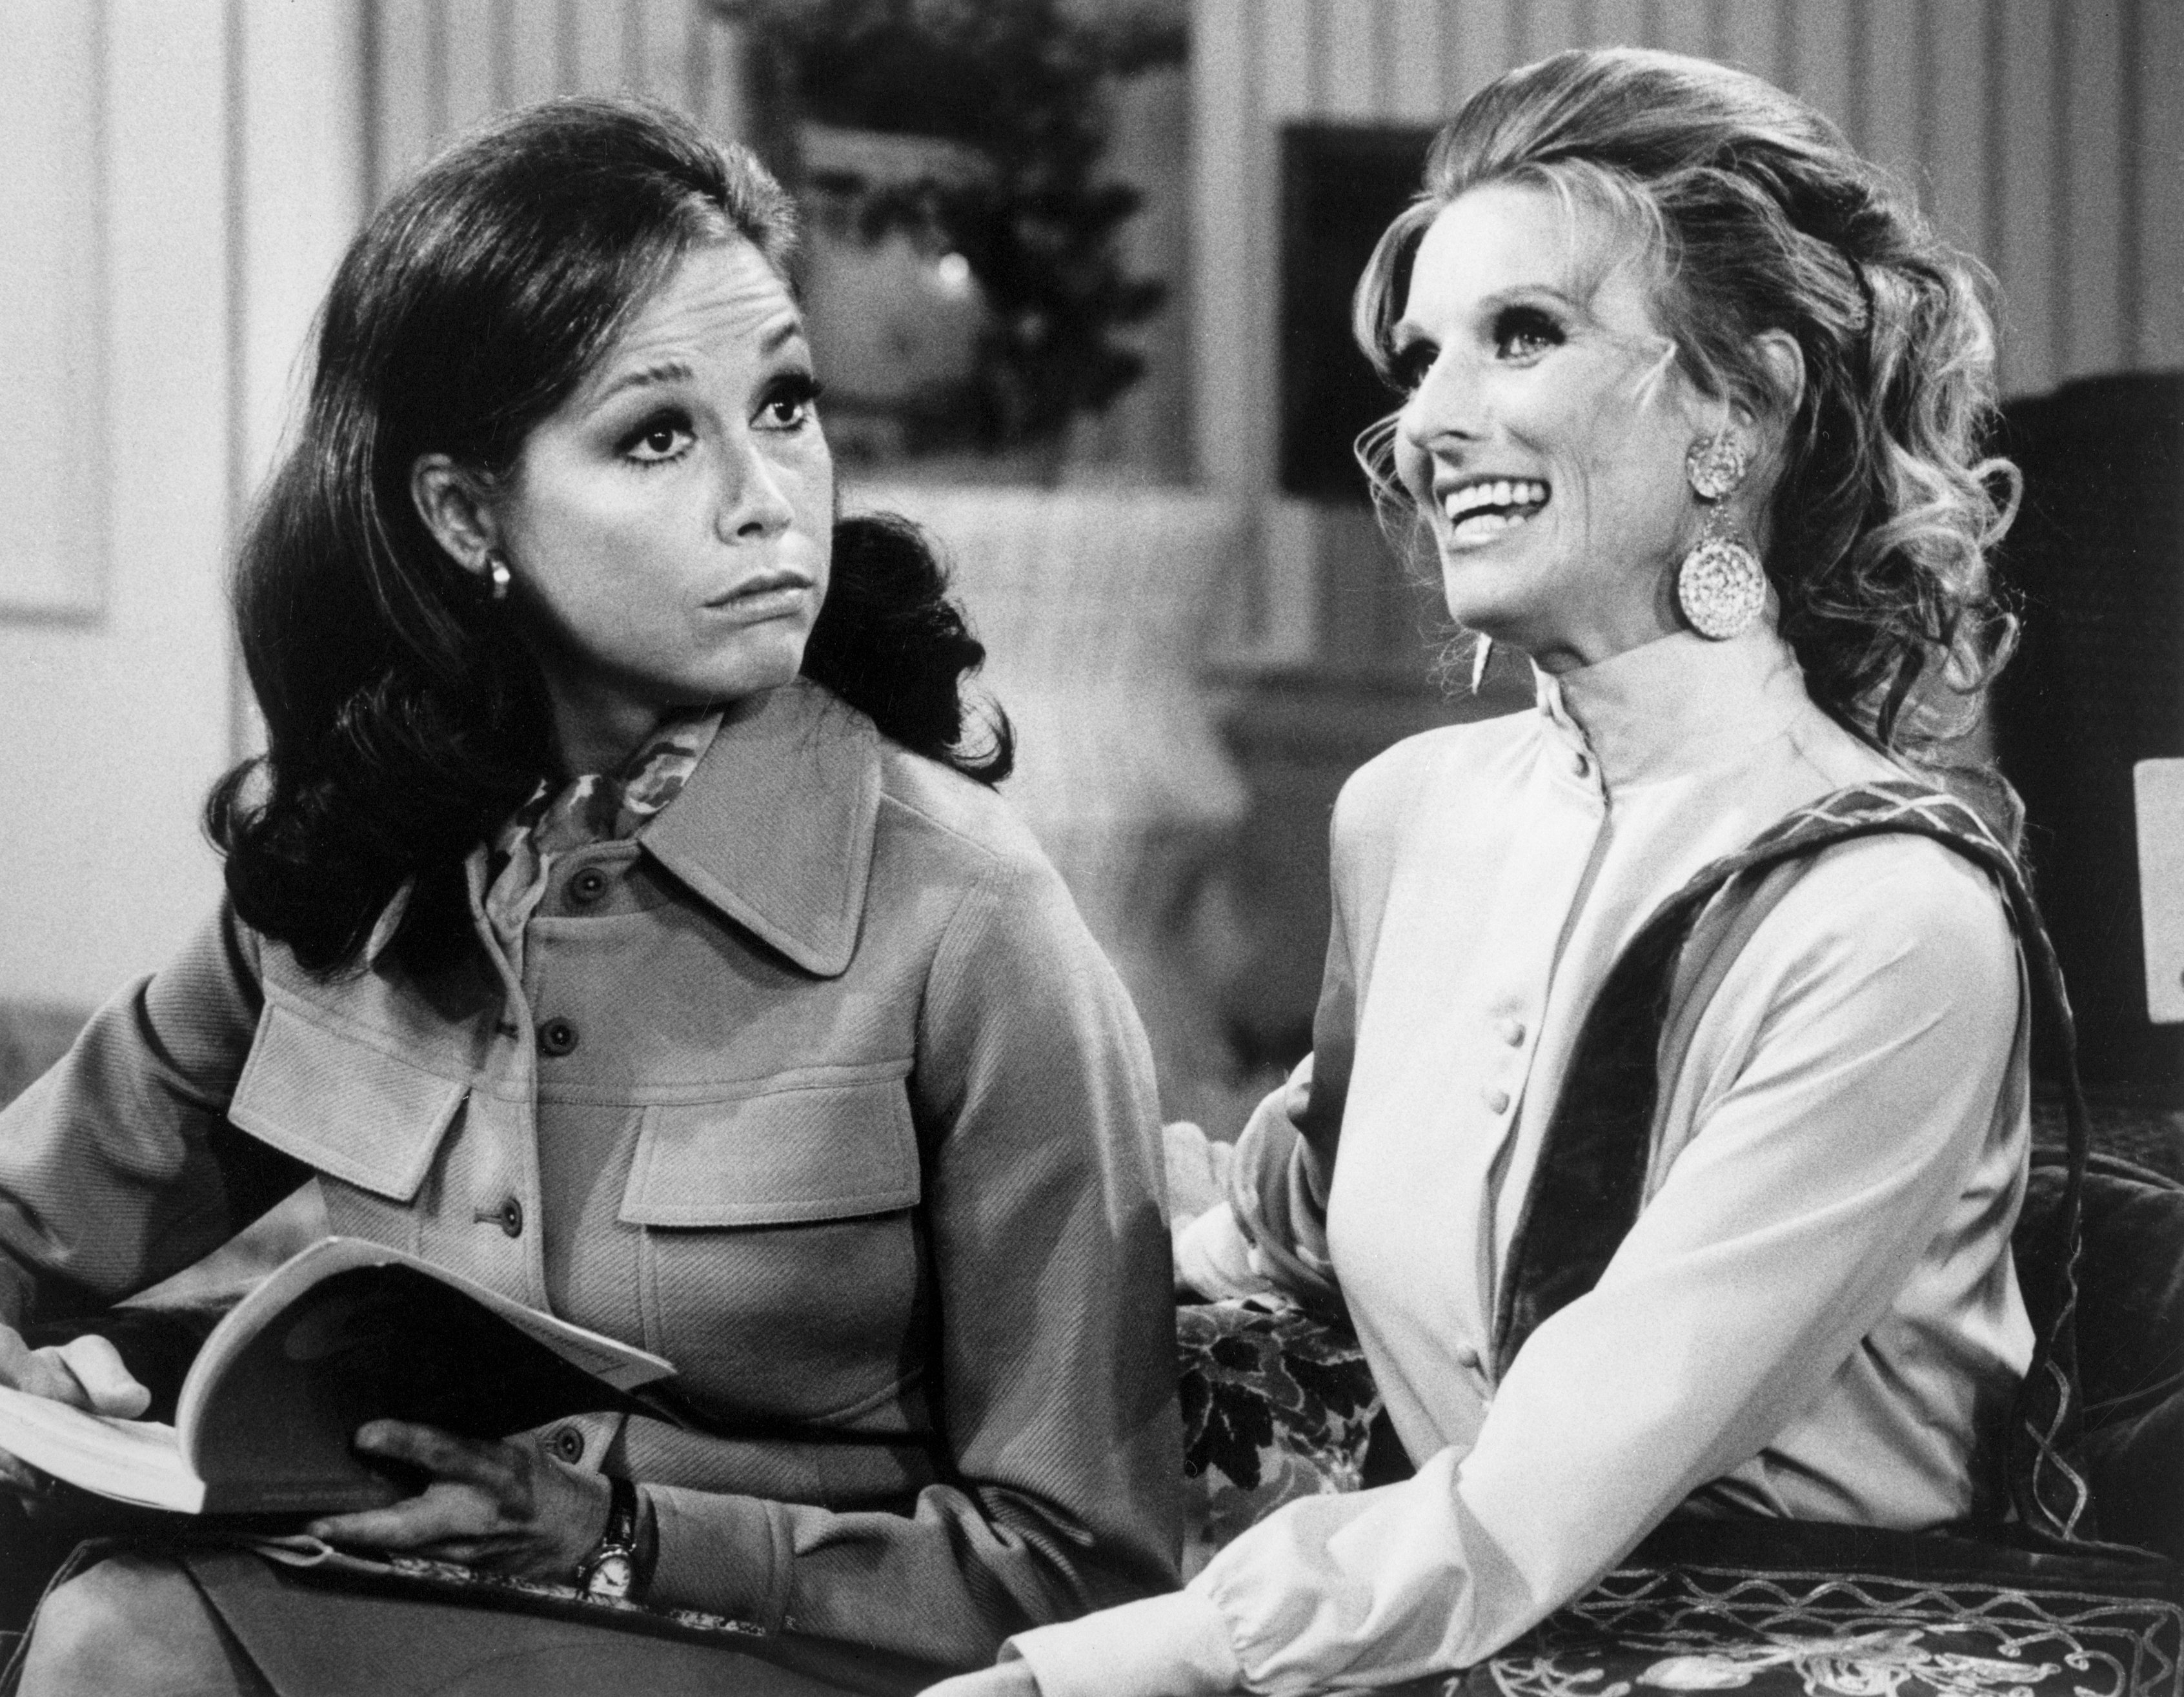 Mary Tyler Moore as Mary Richard and Cloris Leachman as her friend Phyllis Lindstrom in "The Mary Tyler Moore Show," in October 1971. / Source: Getty Images